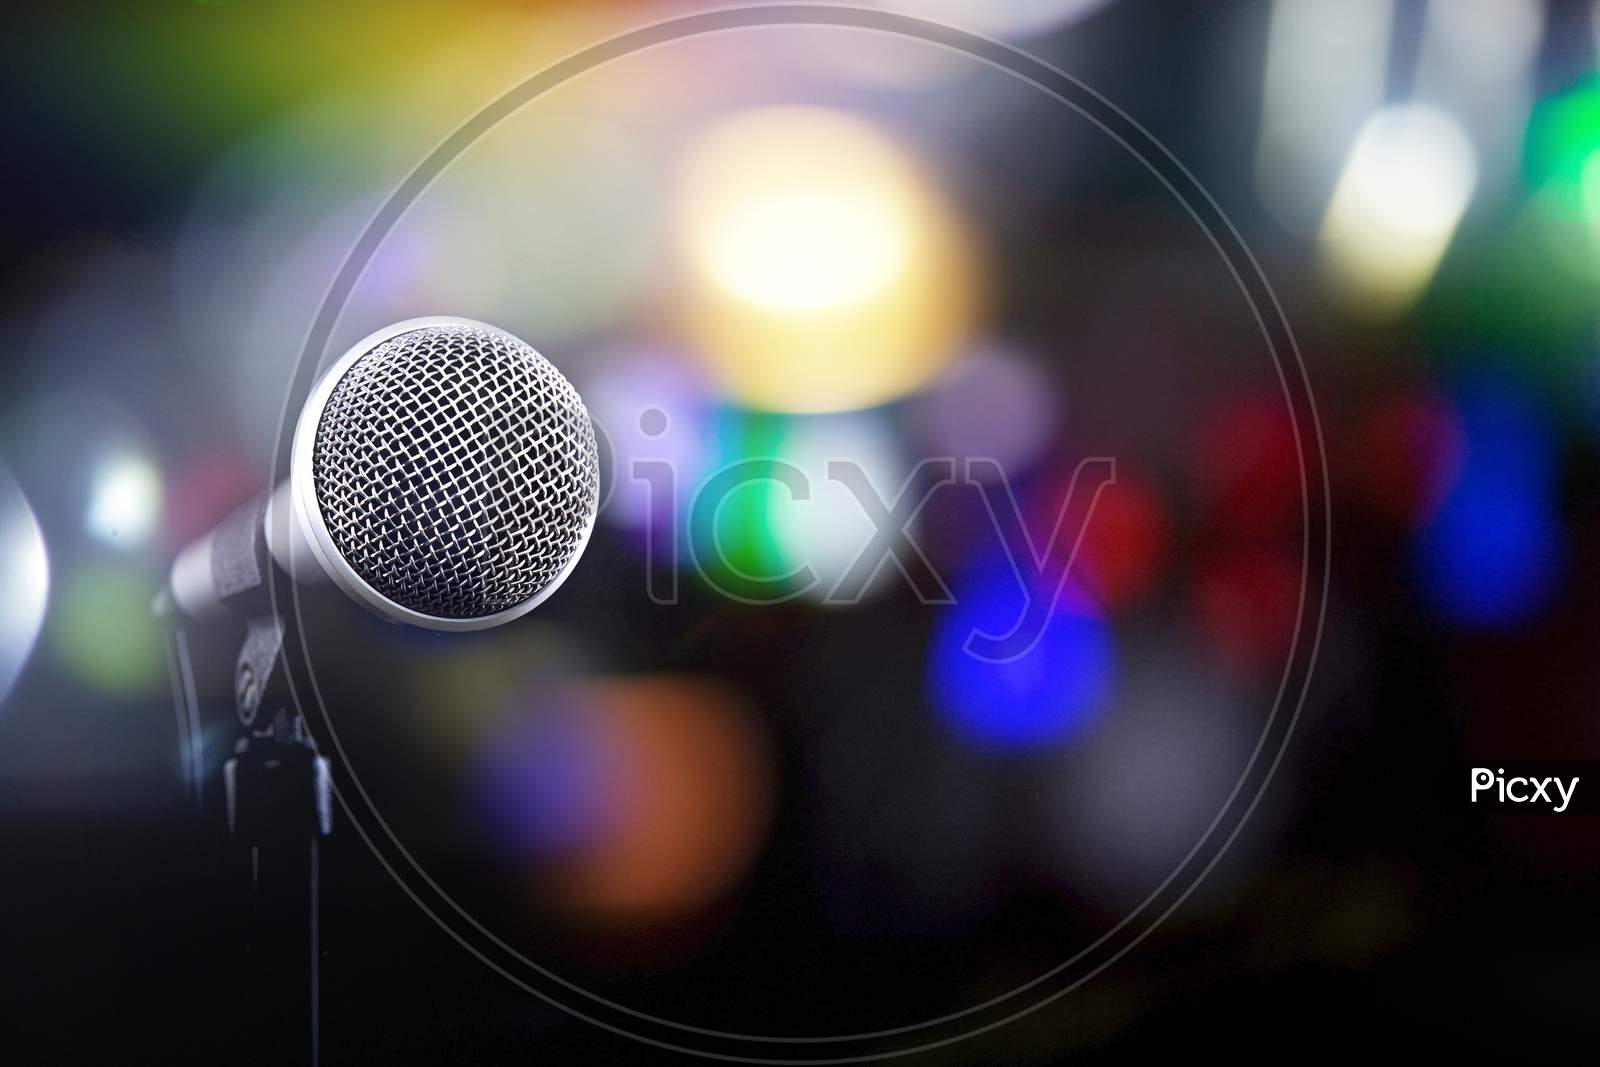 Microphone On A Black Background With Colorful Lights And Flares